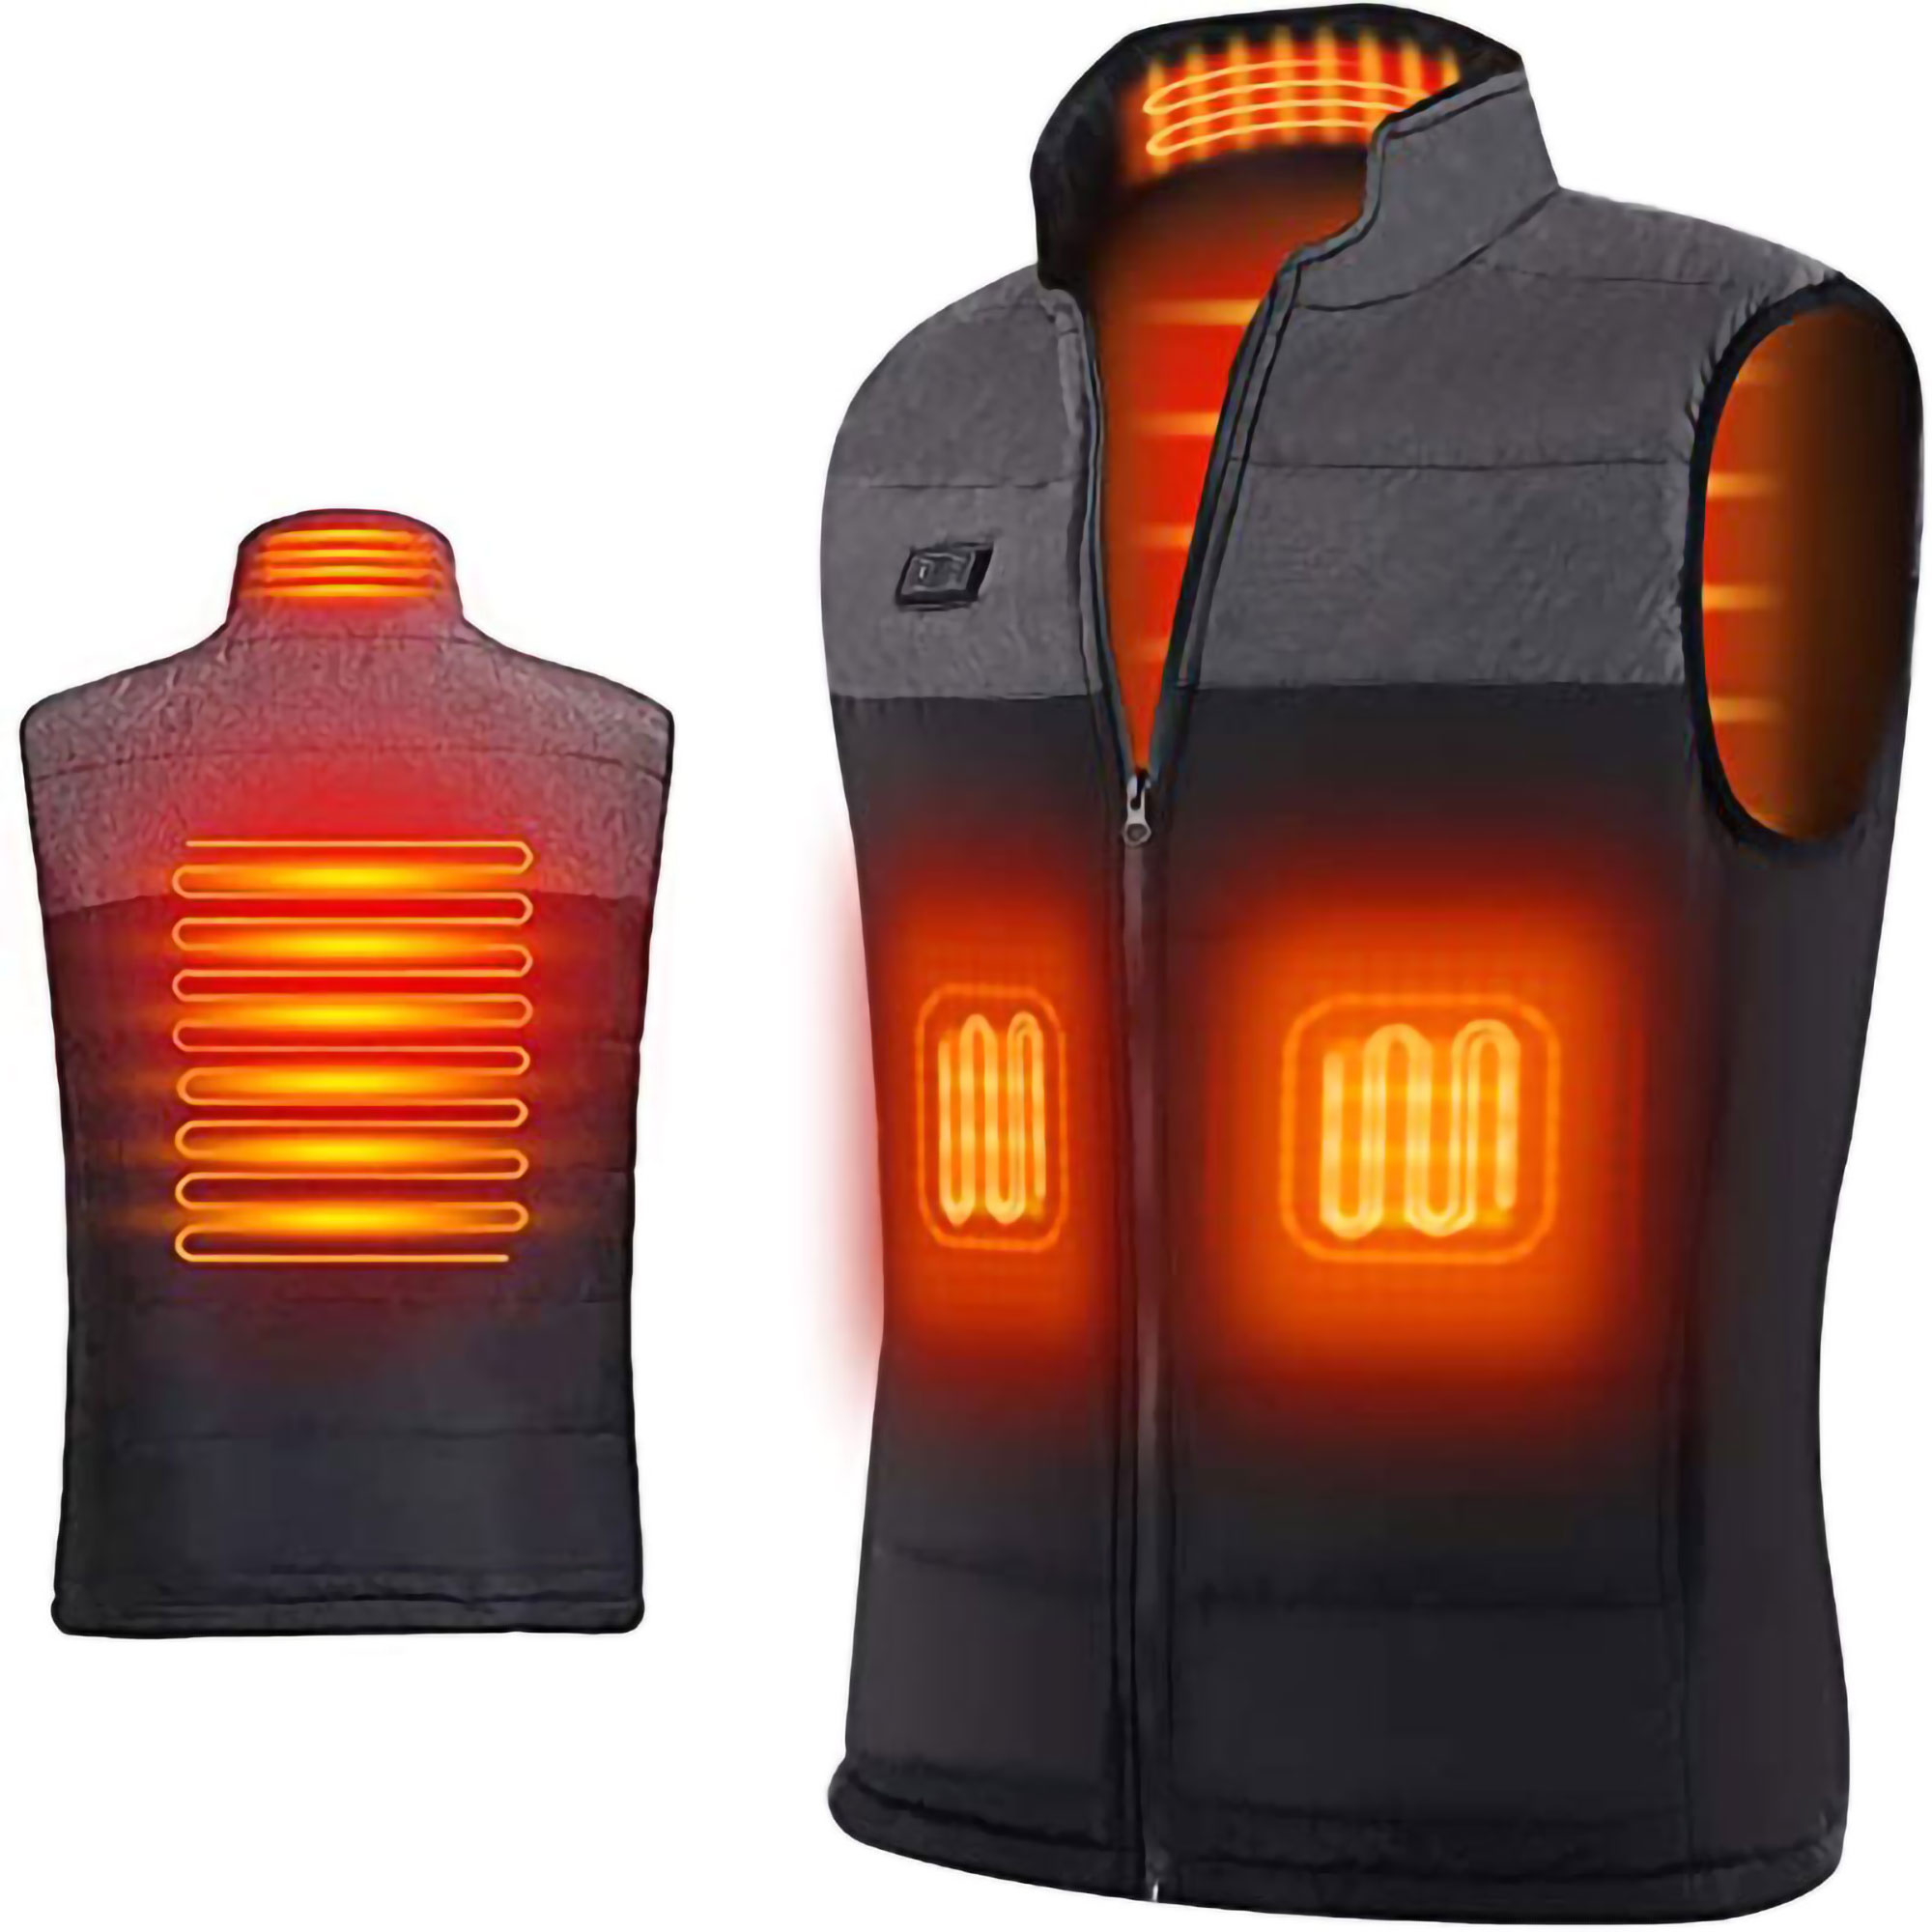 Sexy Dance Electric Heated Vest for Men Women Heating Jacket Sleeveless Zipper Coat Lightweight Thermal Outwear With 10000mHA Power Bank - image 1 of 11